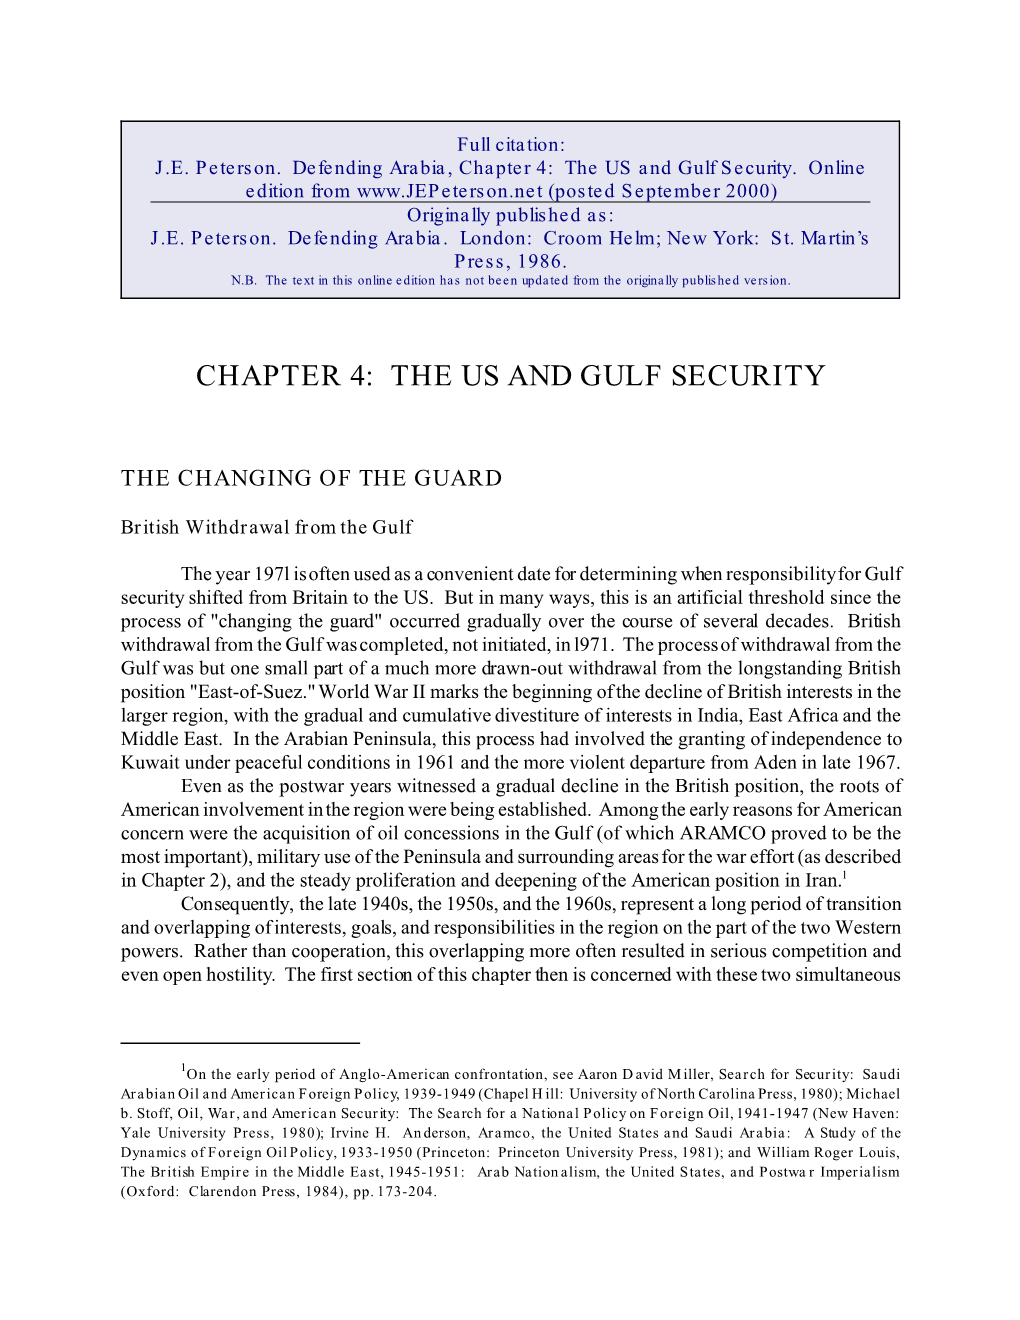 Chapter 4: the US and Gulf Security